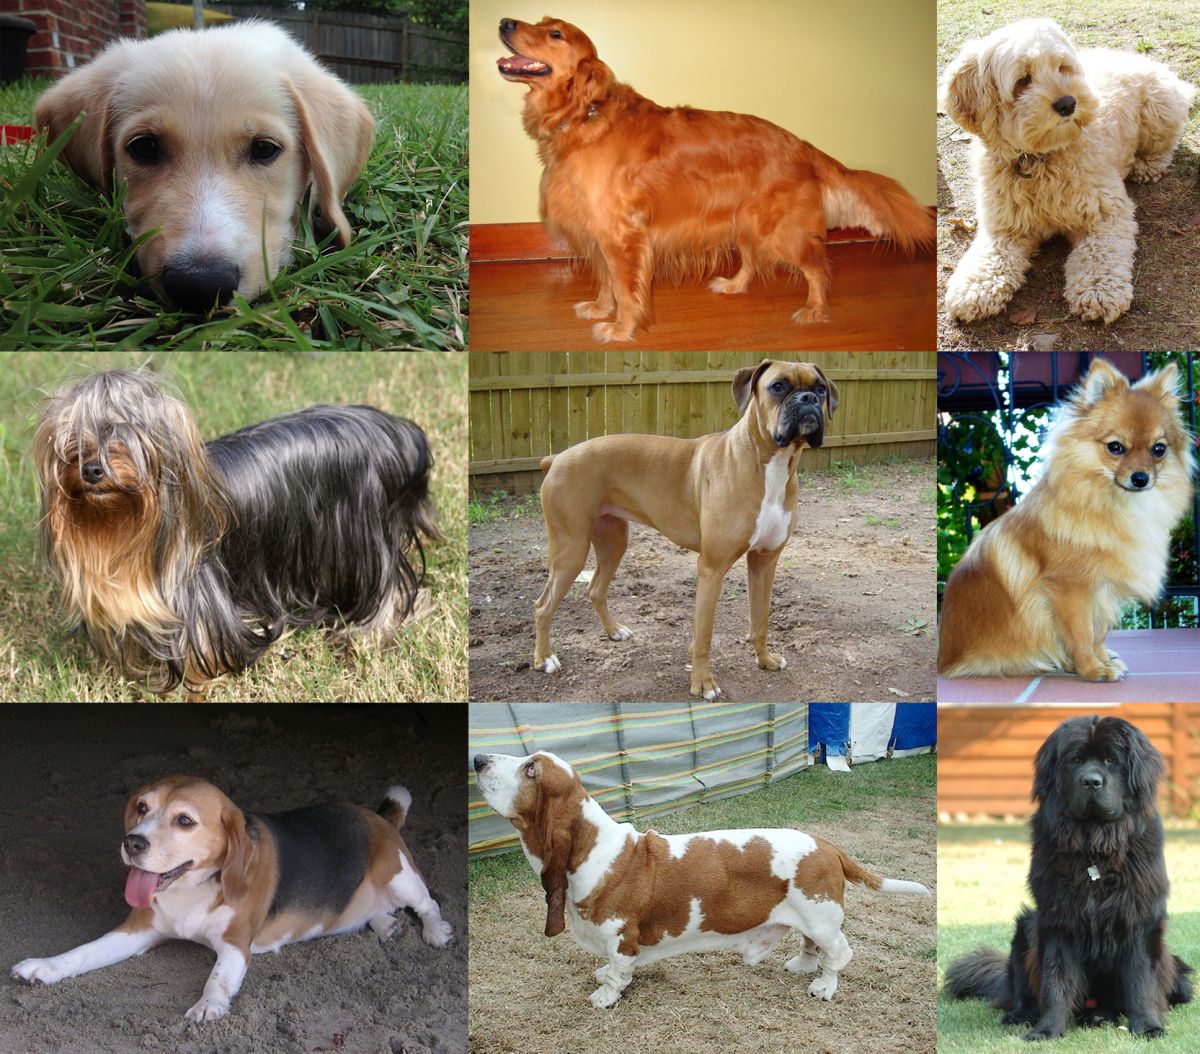 World Zoonoses Day: Love Your Pets till  Live  but Keep These Things In Mind